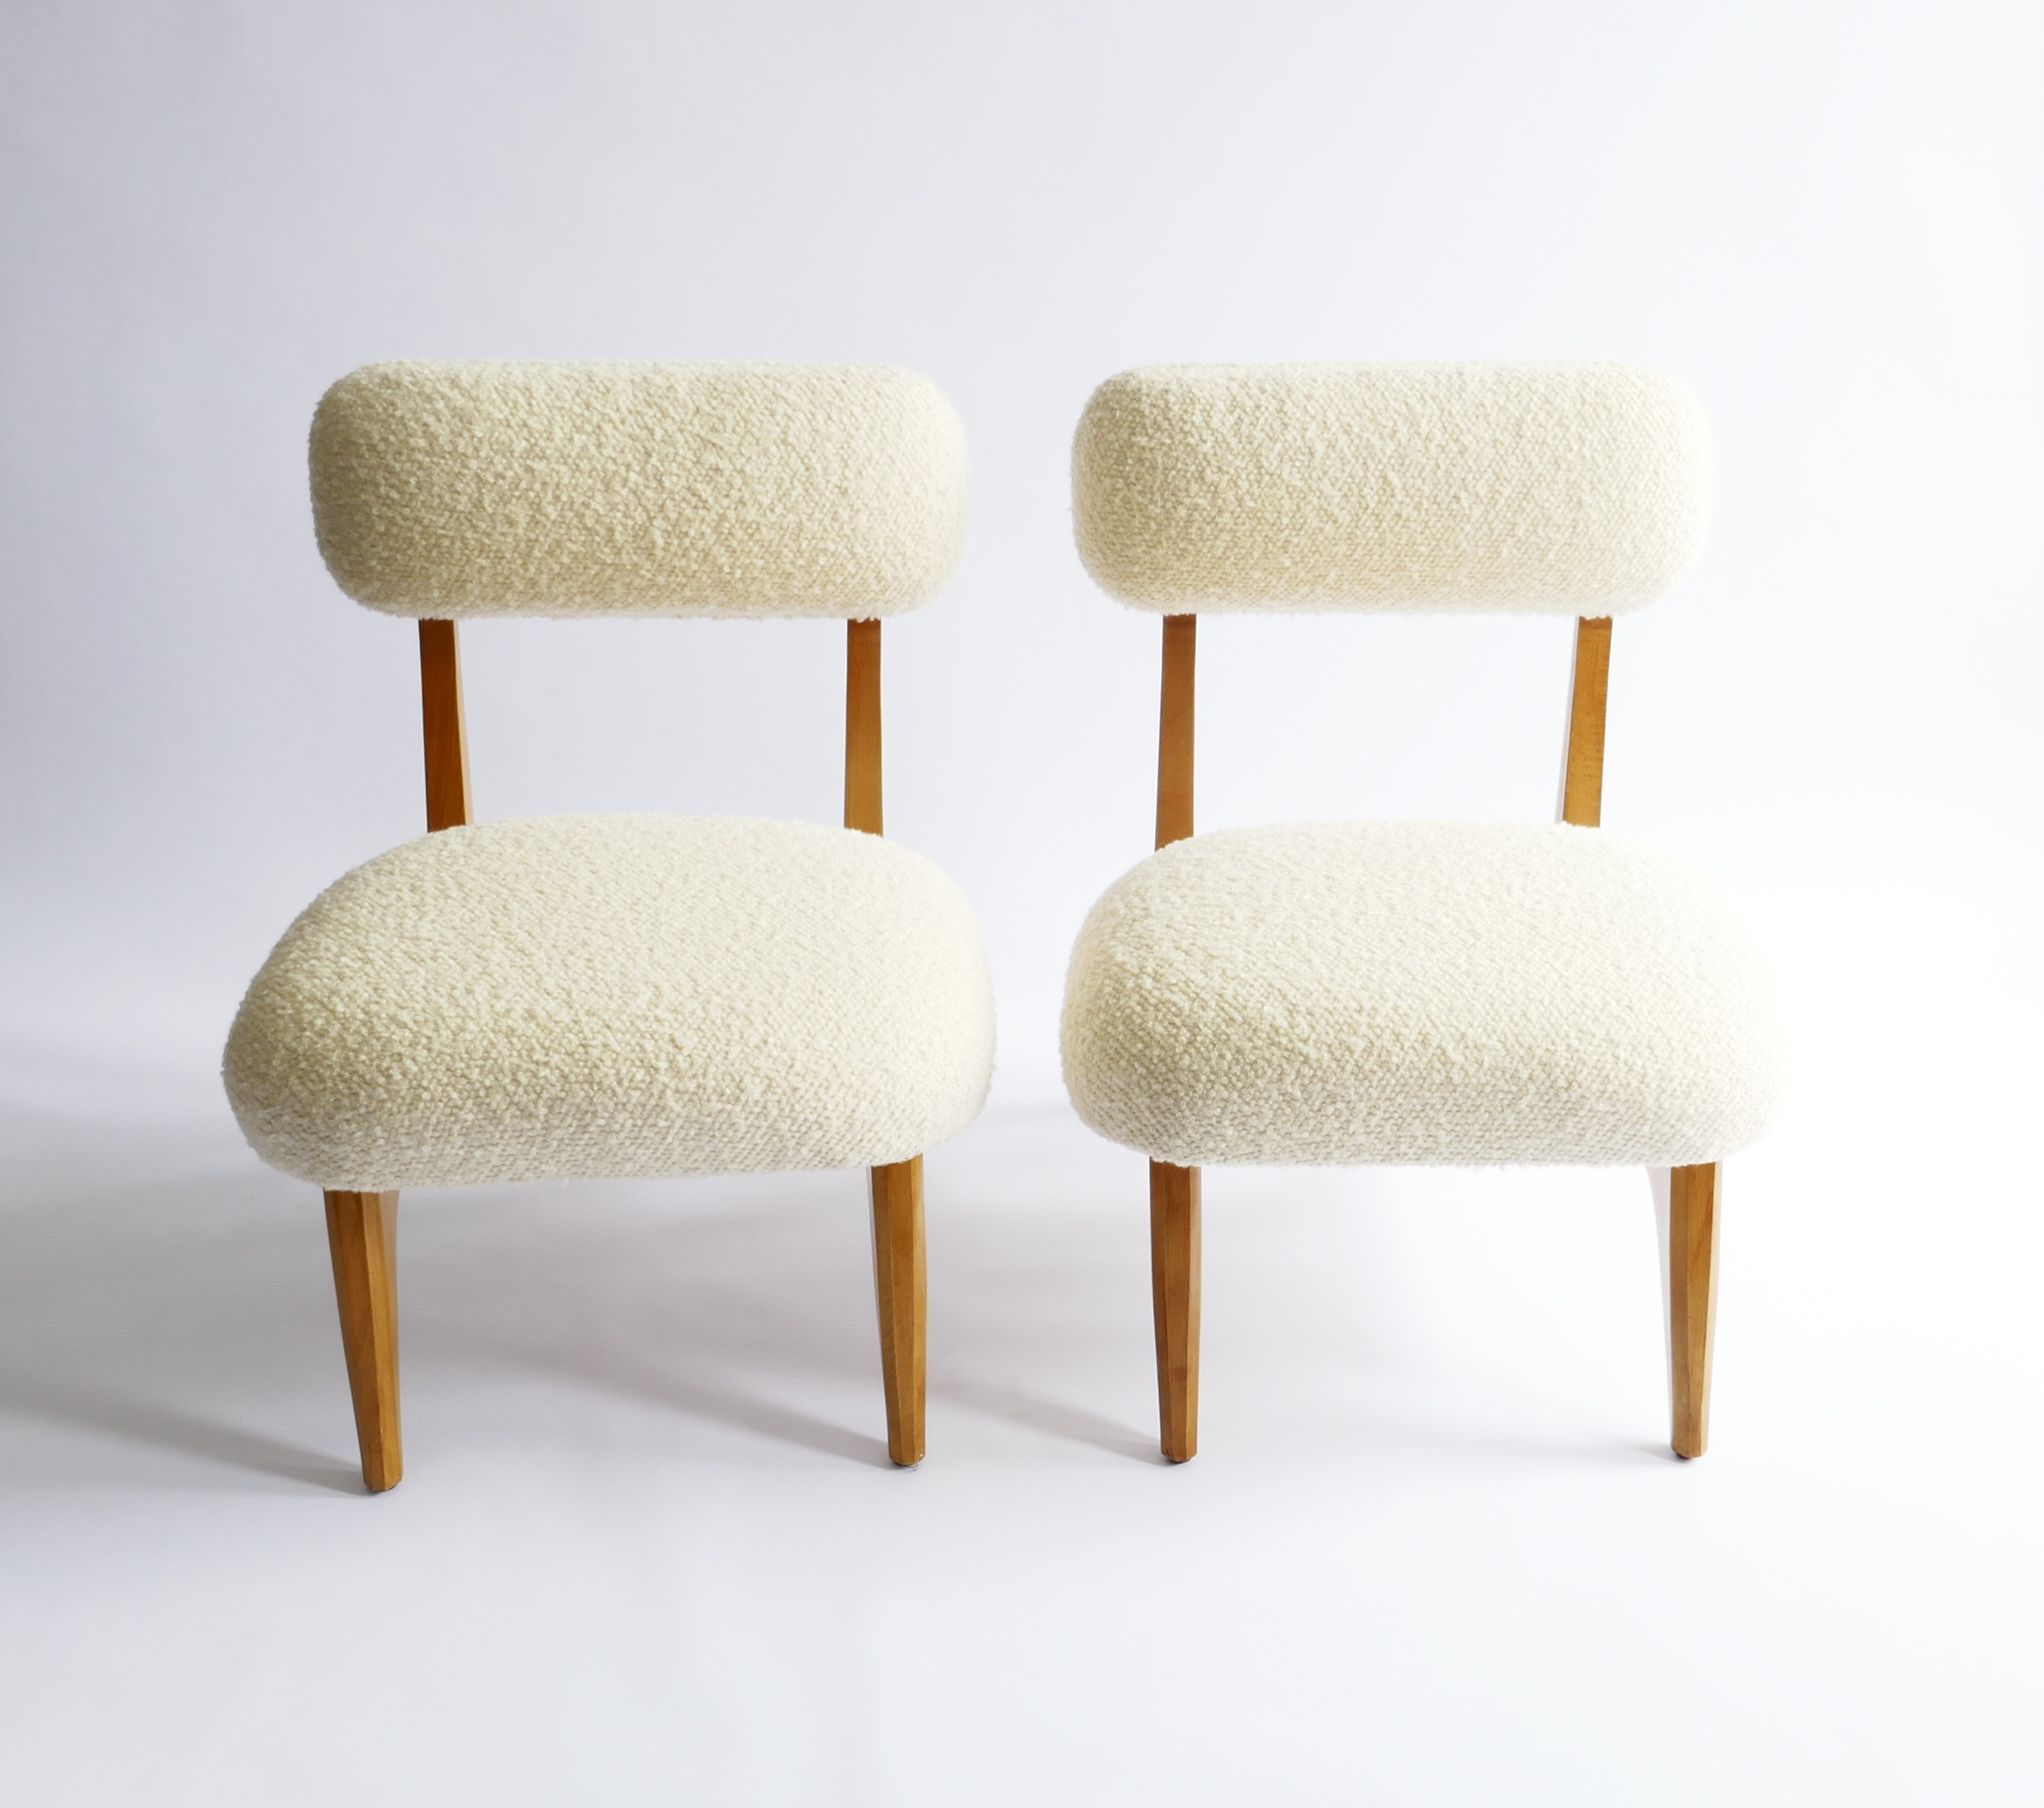 Sold - Pair of Italian Midcentury Lounge Chairs in Creamy White Boucle